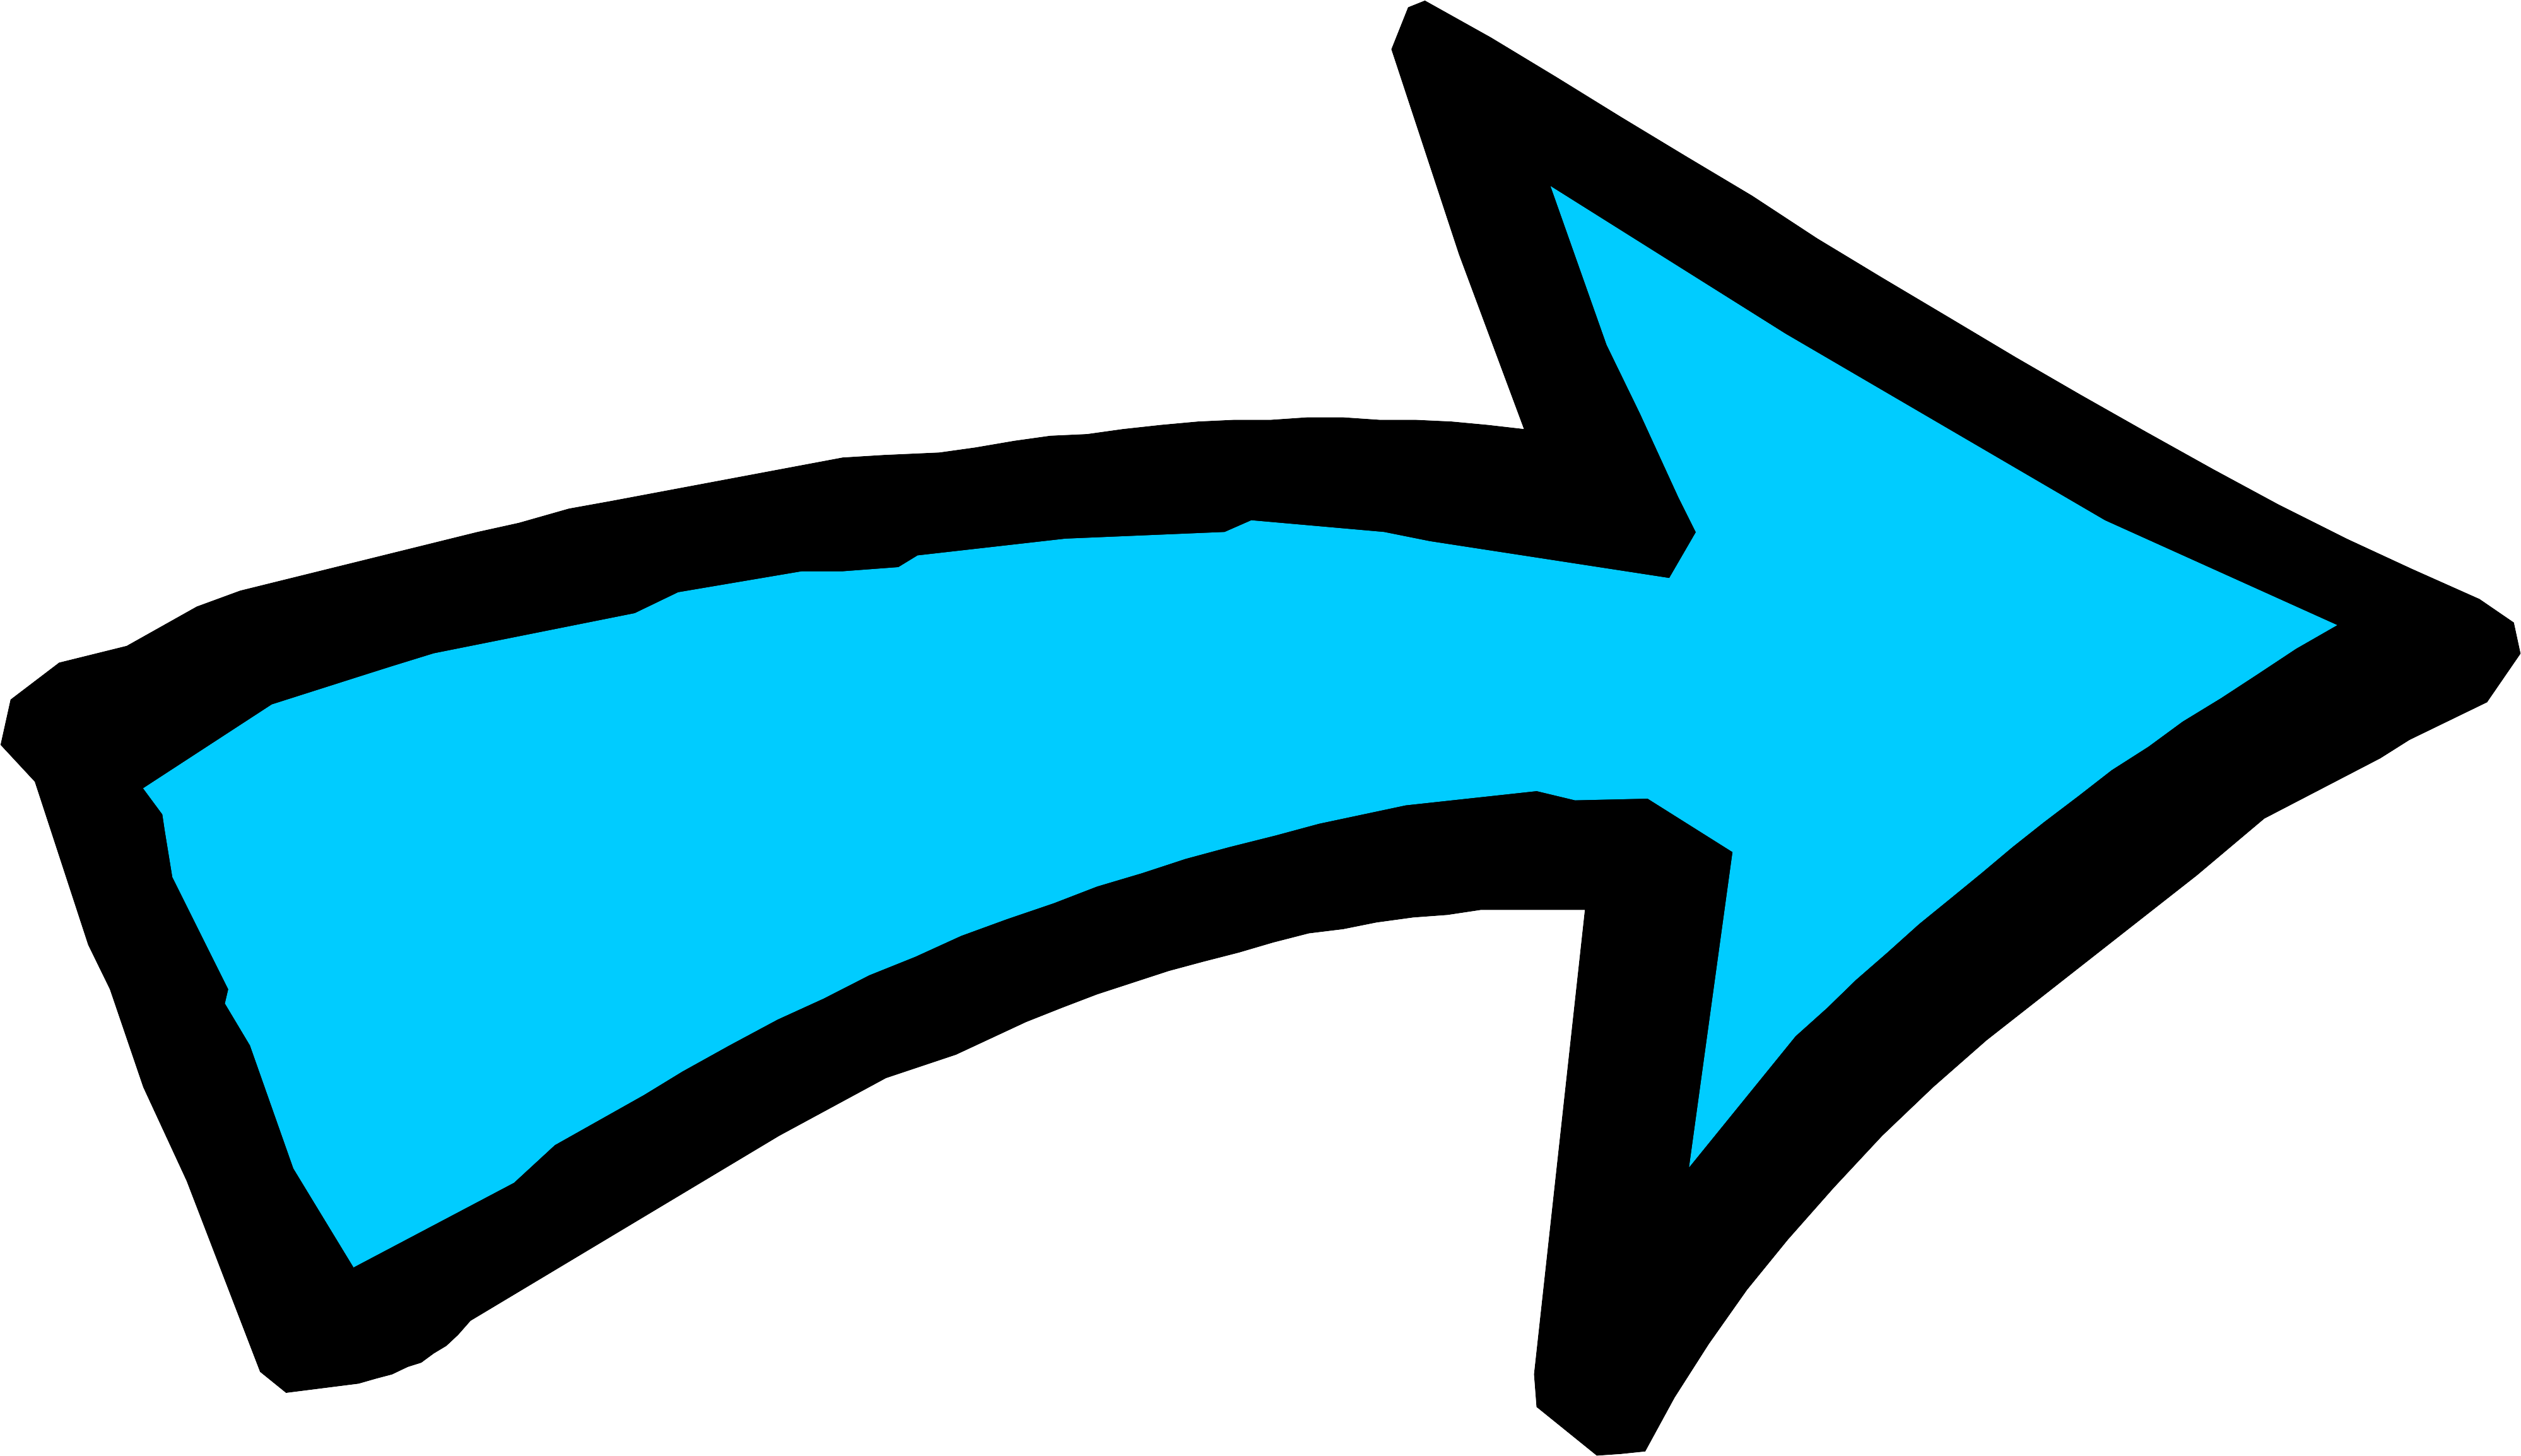  illustration of a. Arrow clipart funky